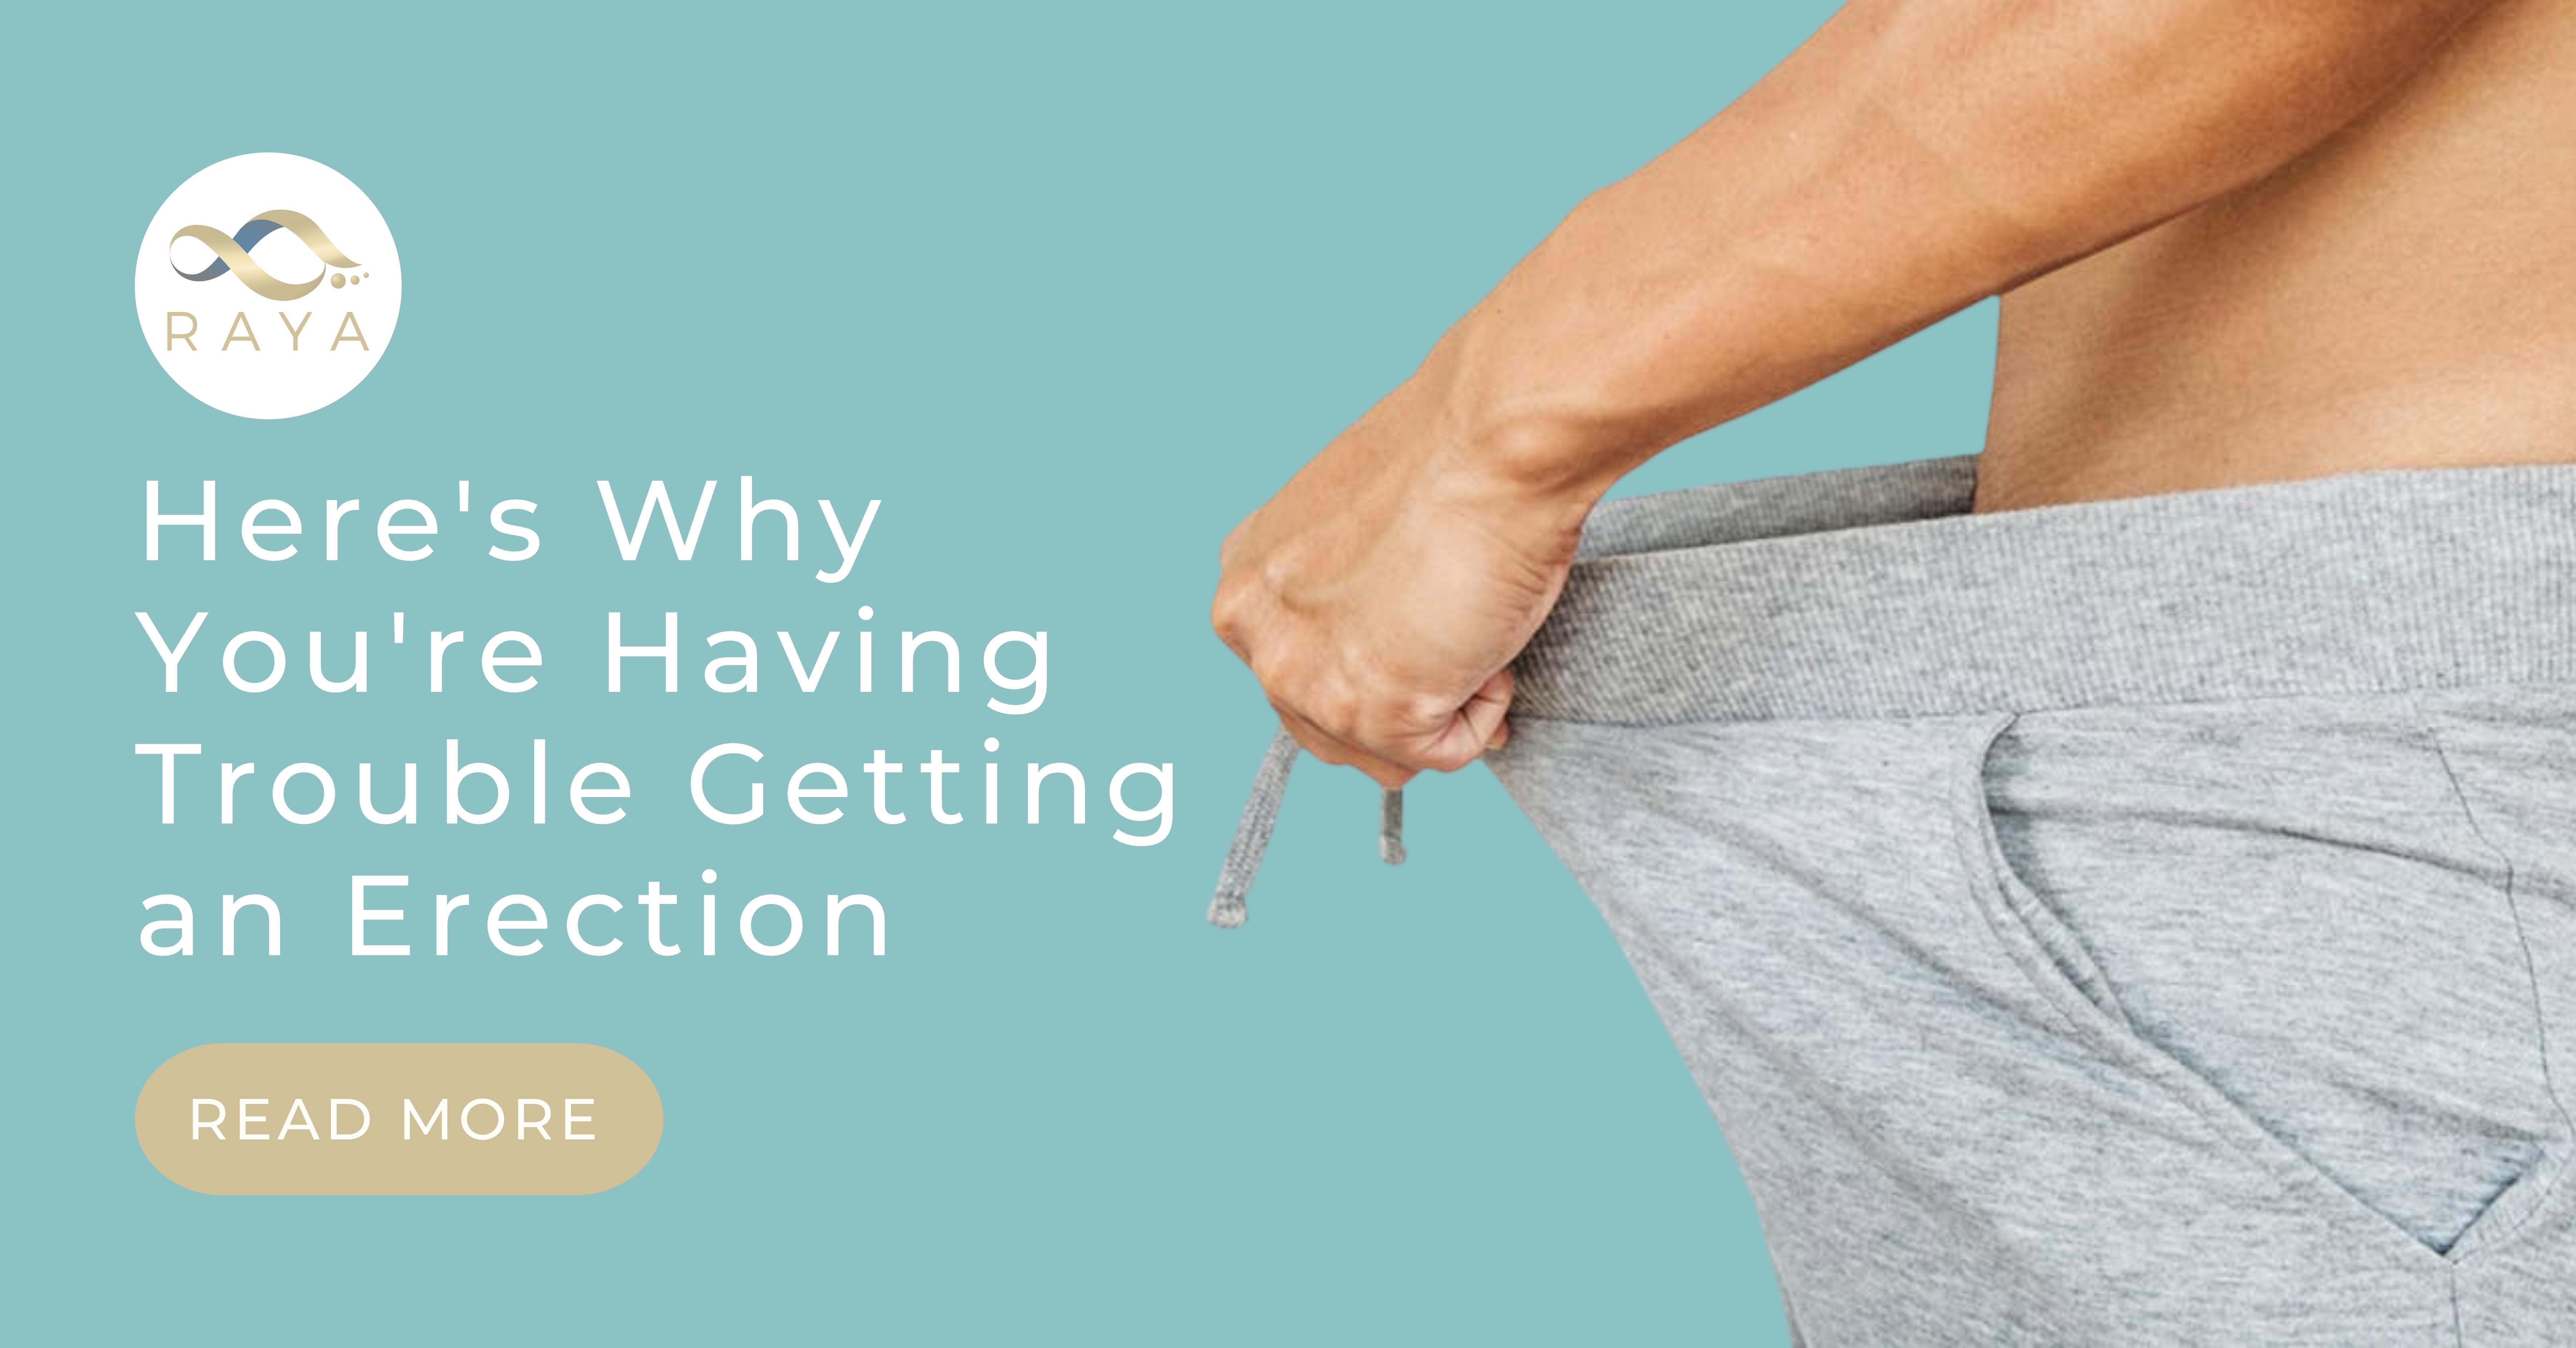 Here’s Why You’re Having Trouble Getting an Erection